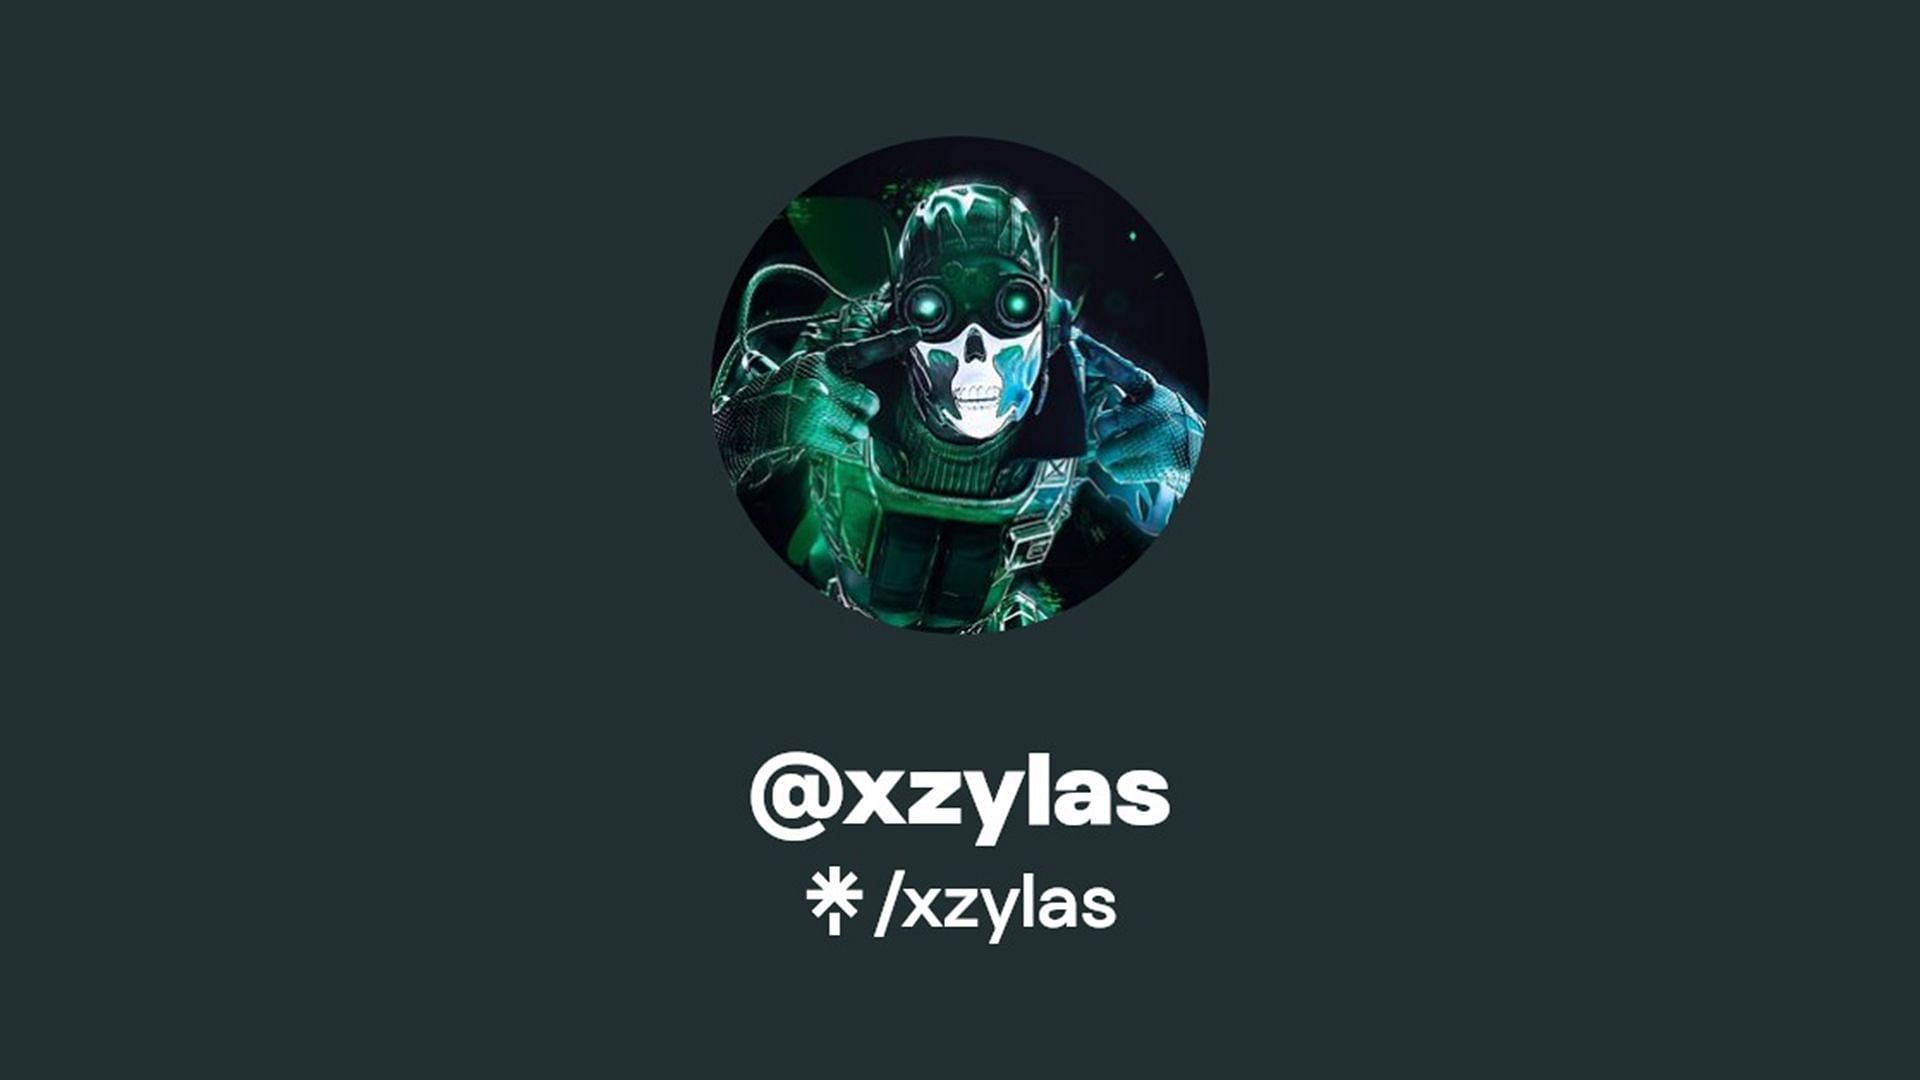 Xzylas is one of the best movement players in Apex Legends (Image via Xzylas/X)